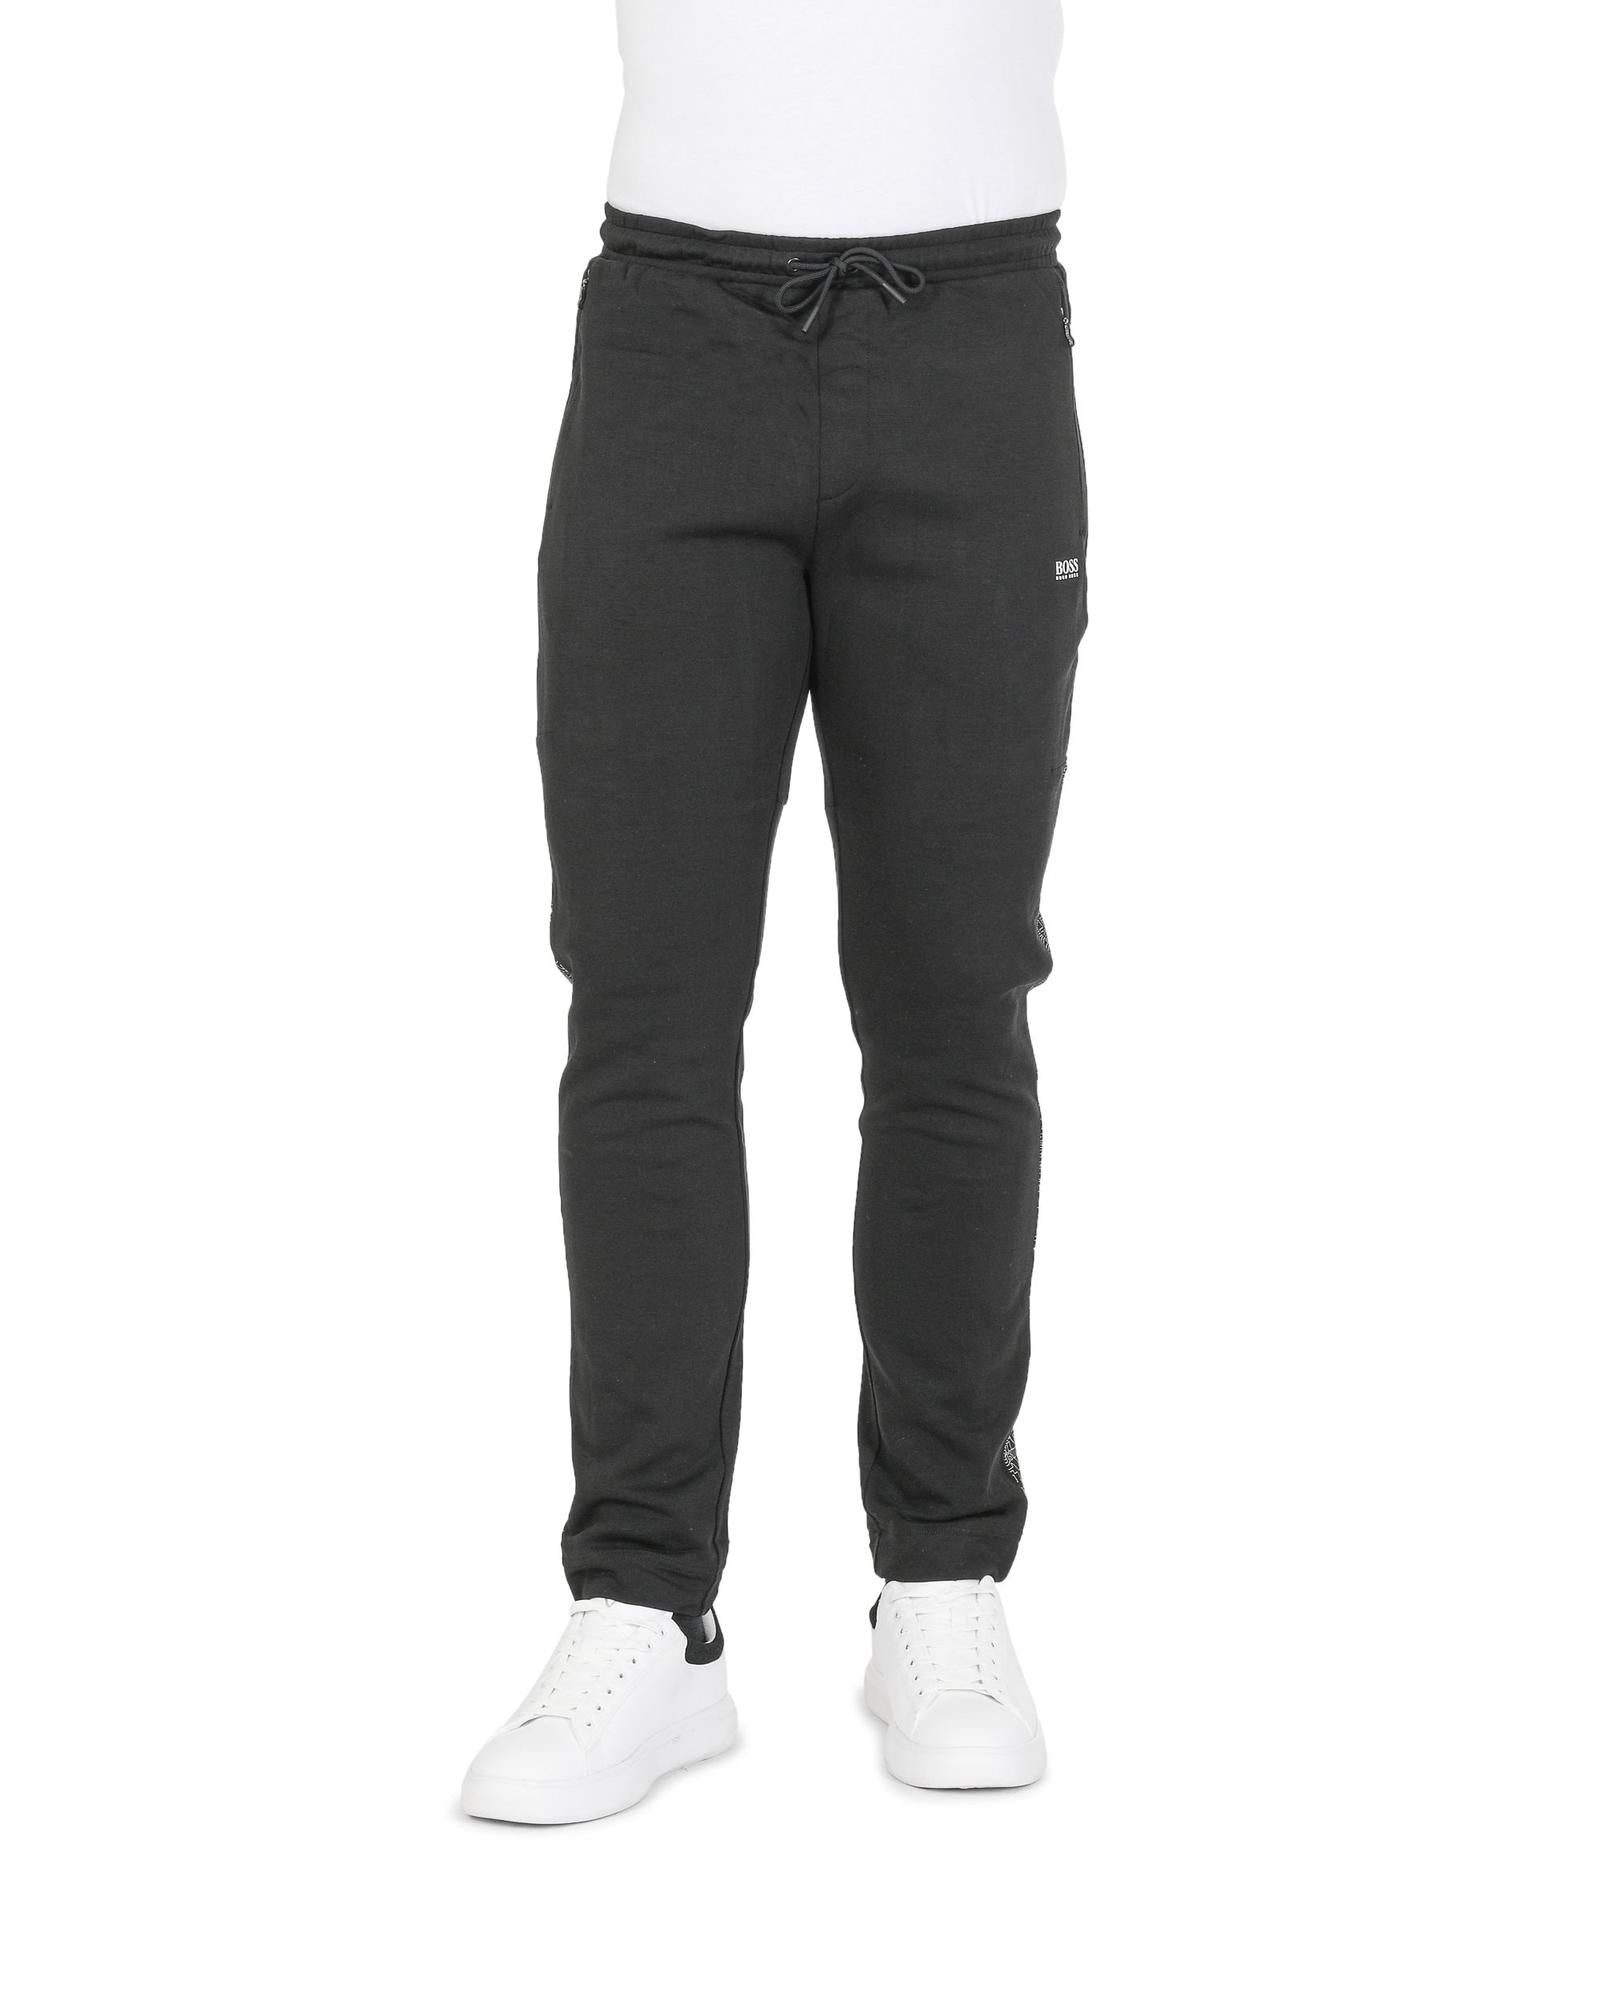 Men's Black Cotton Blend Pants with Stretch in Black - S